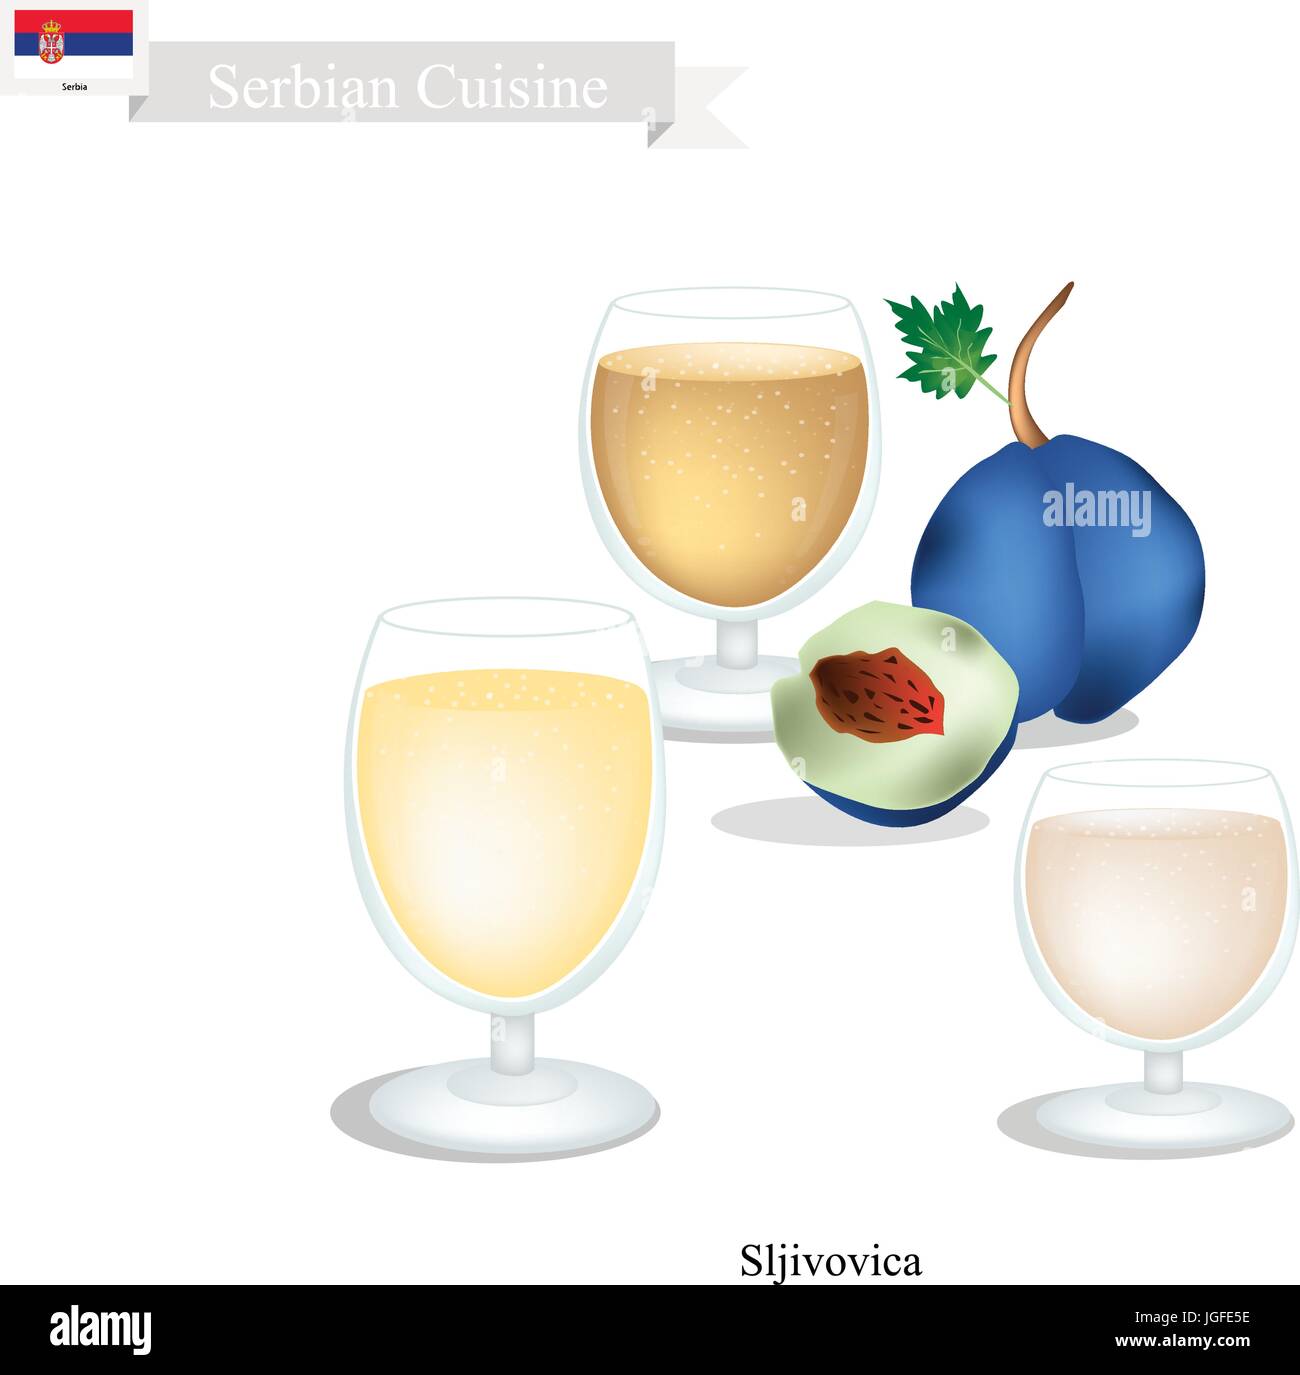 Serbian Cuisine, Sljivovica or Traditional Alcoholic Plum Brandy. One of The Most Popular Drink in Serbia. Stock Vector